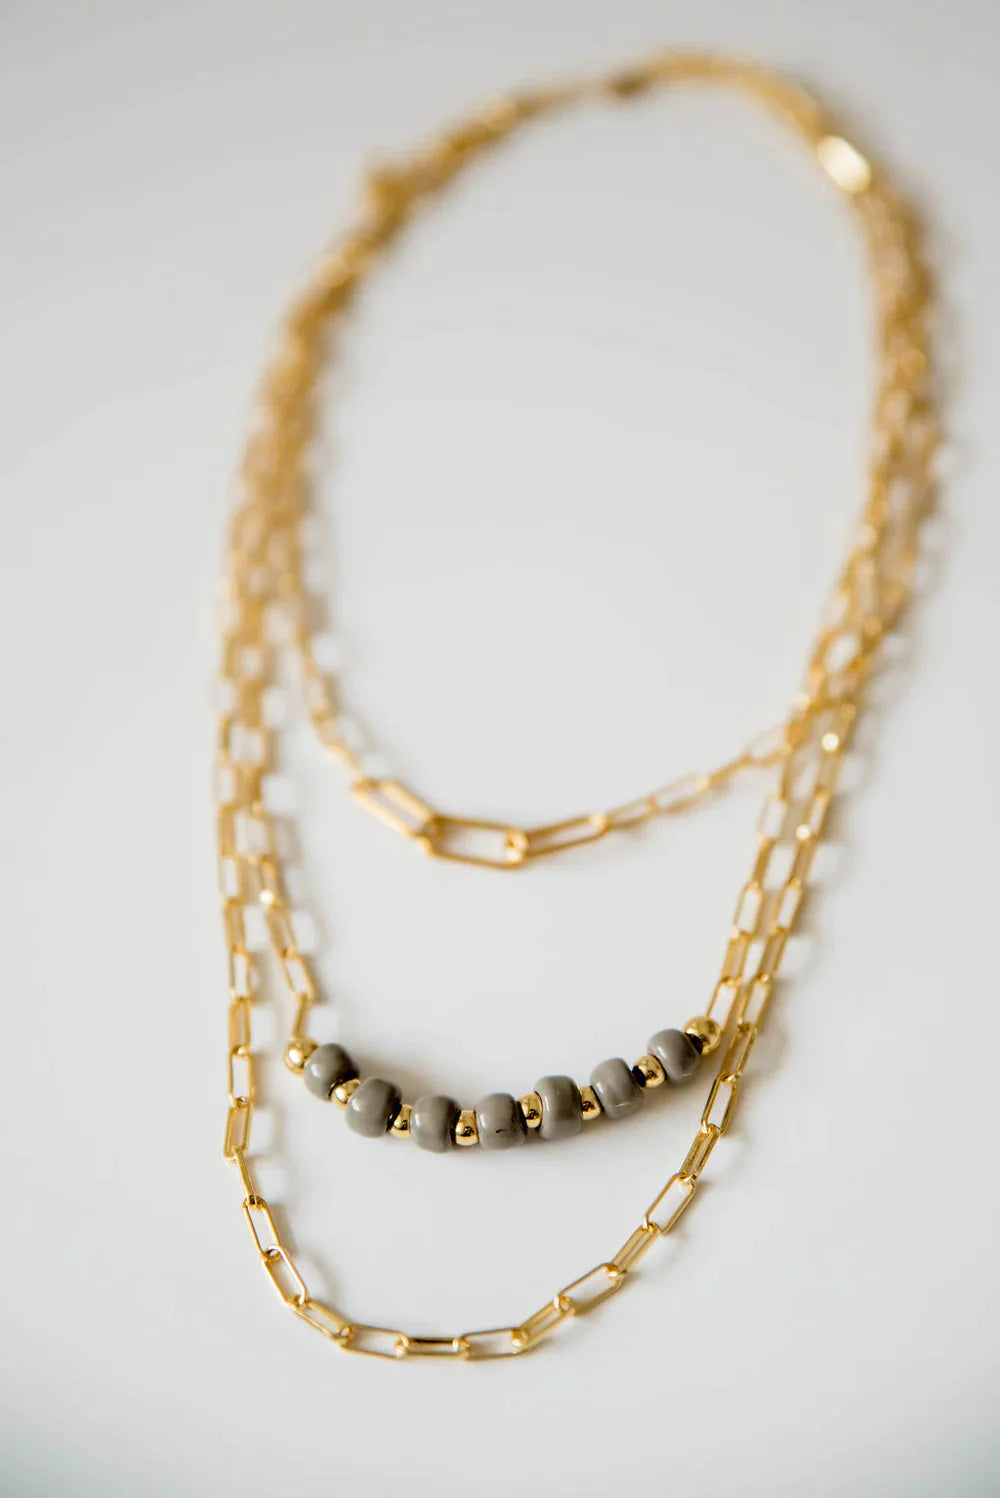 Bel Koz Simple Clay Bead Layered Necklace - STORM - Link in description to purchase at Betsey's